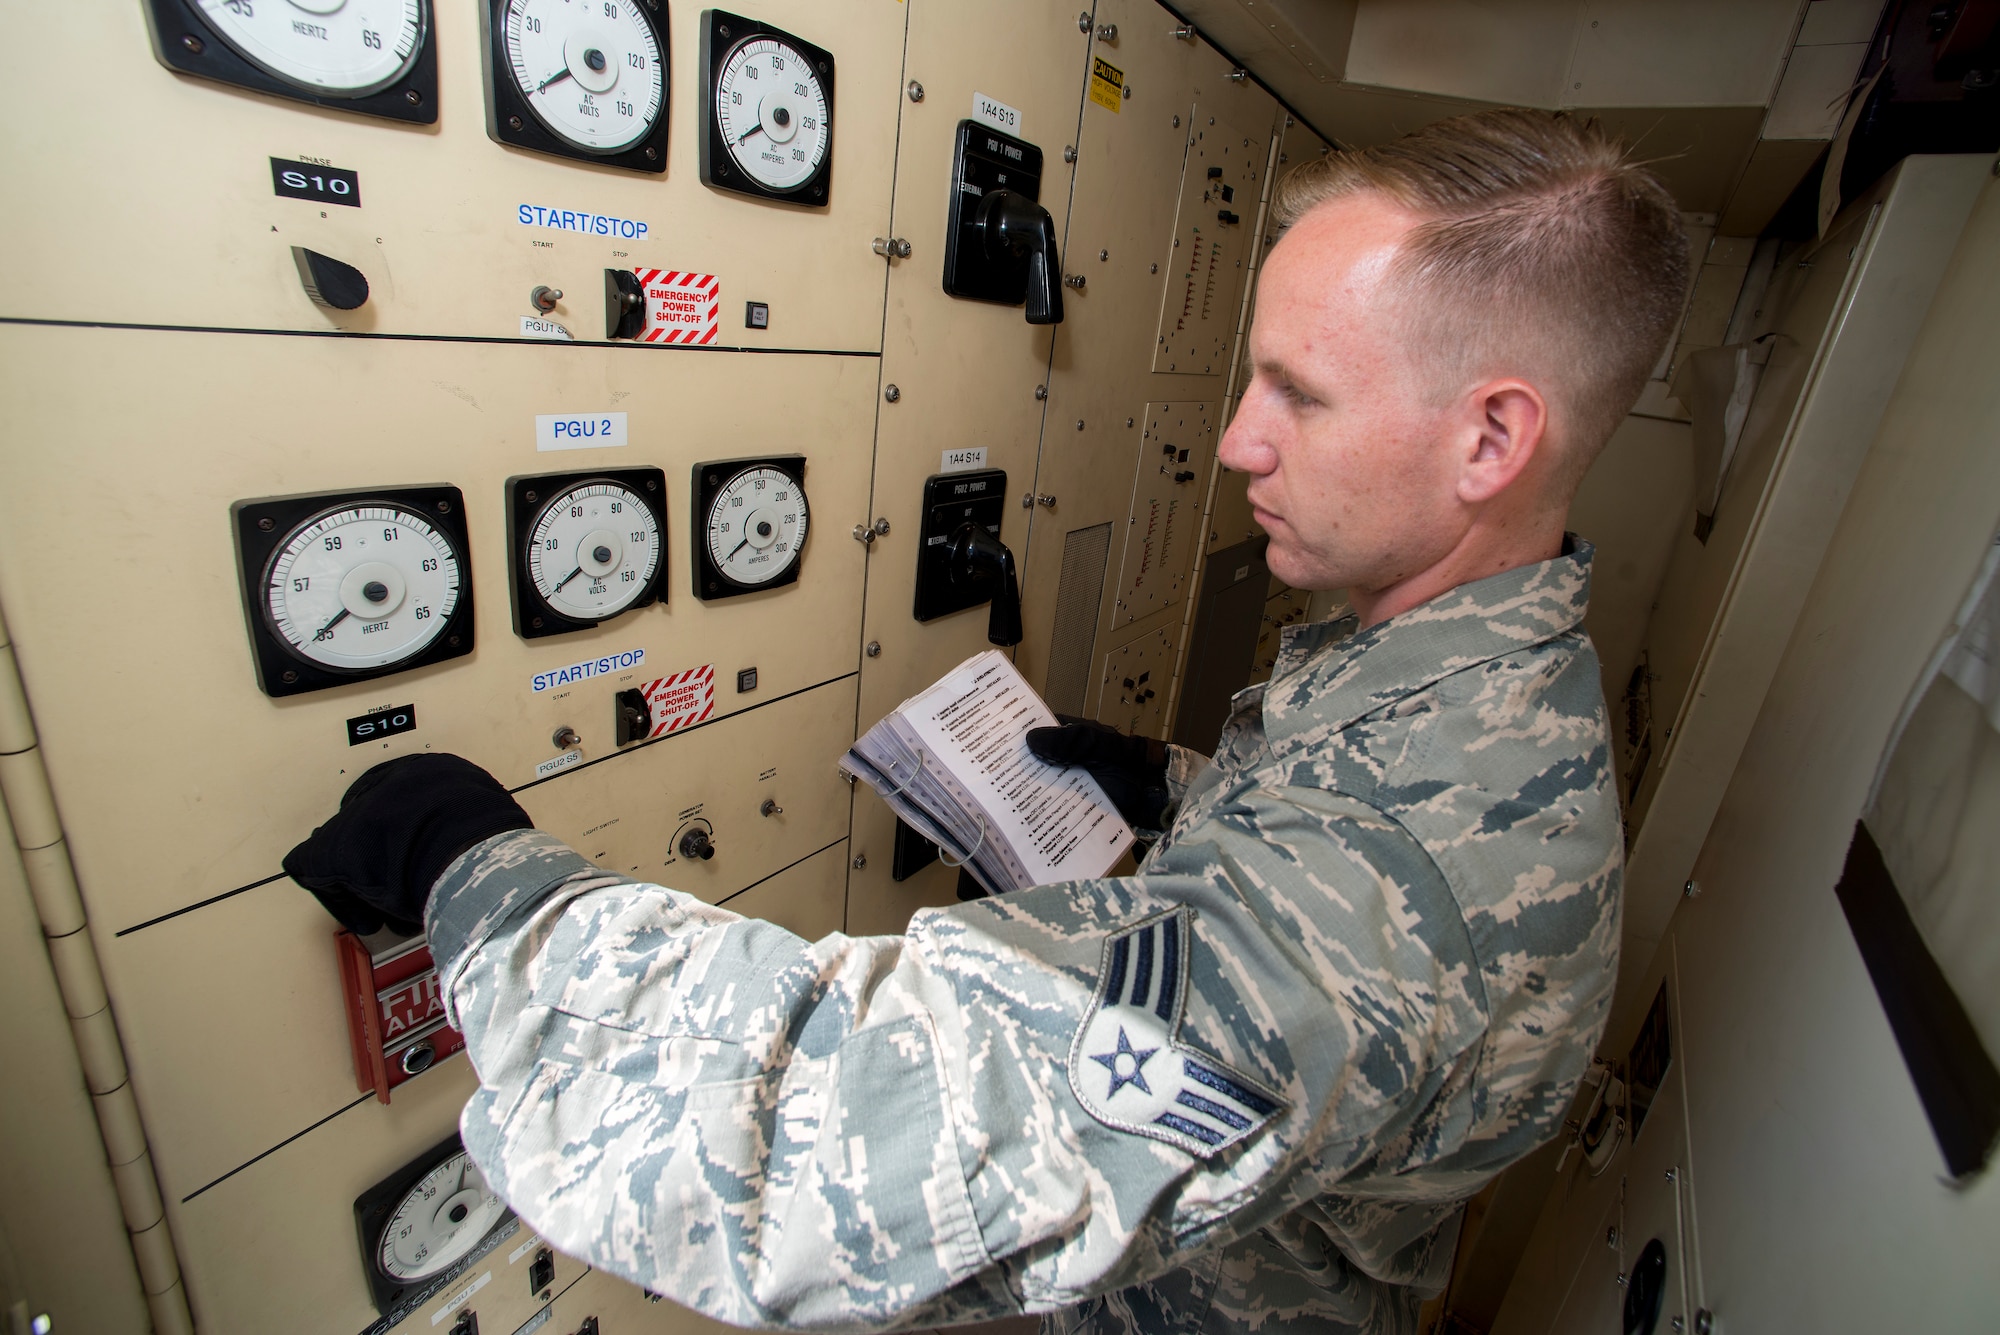 U.S. Air Force Senior Airman Jonathan R. Smail, a transmission technician from the 233rd Space Communications Squadron, Colorado Air National Guard, monitors computer systems in a mobile satellite trailer at Greeley Air National Guard Station, Greeley, Colo., June 7, 2015. Smail, who troubleshoots and maintains satellite communications electronic equipment for the 233rd's one-of-a-kind mobile nuclear and missile launch tracking mission, won the 2014 Air National Guardsman of the year. (Air National Guard photo by Tech. Sgt. Wolfram M. Stumpf)